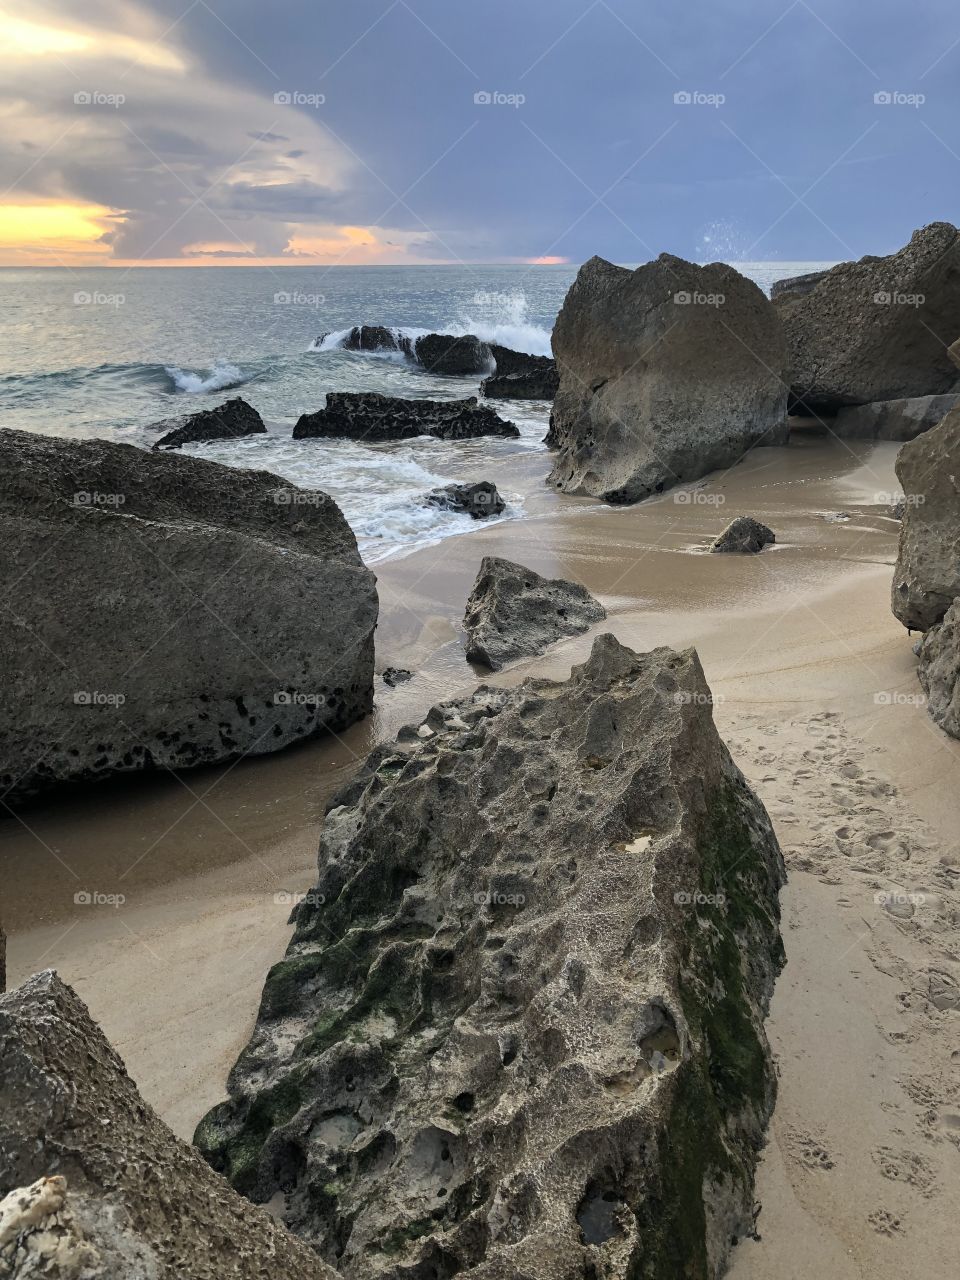 Atlantic Ocean waves break on the rocks at Nazaré, the sun is going down as a storm begins to roll in - no edits, no filter, #truephotos, true nature